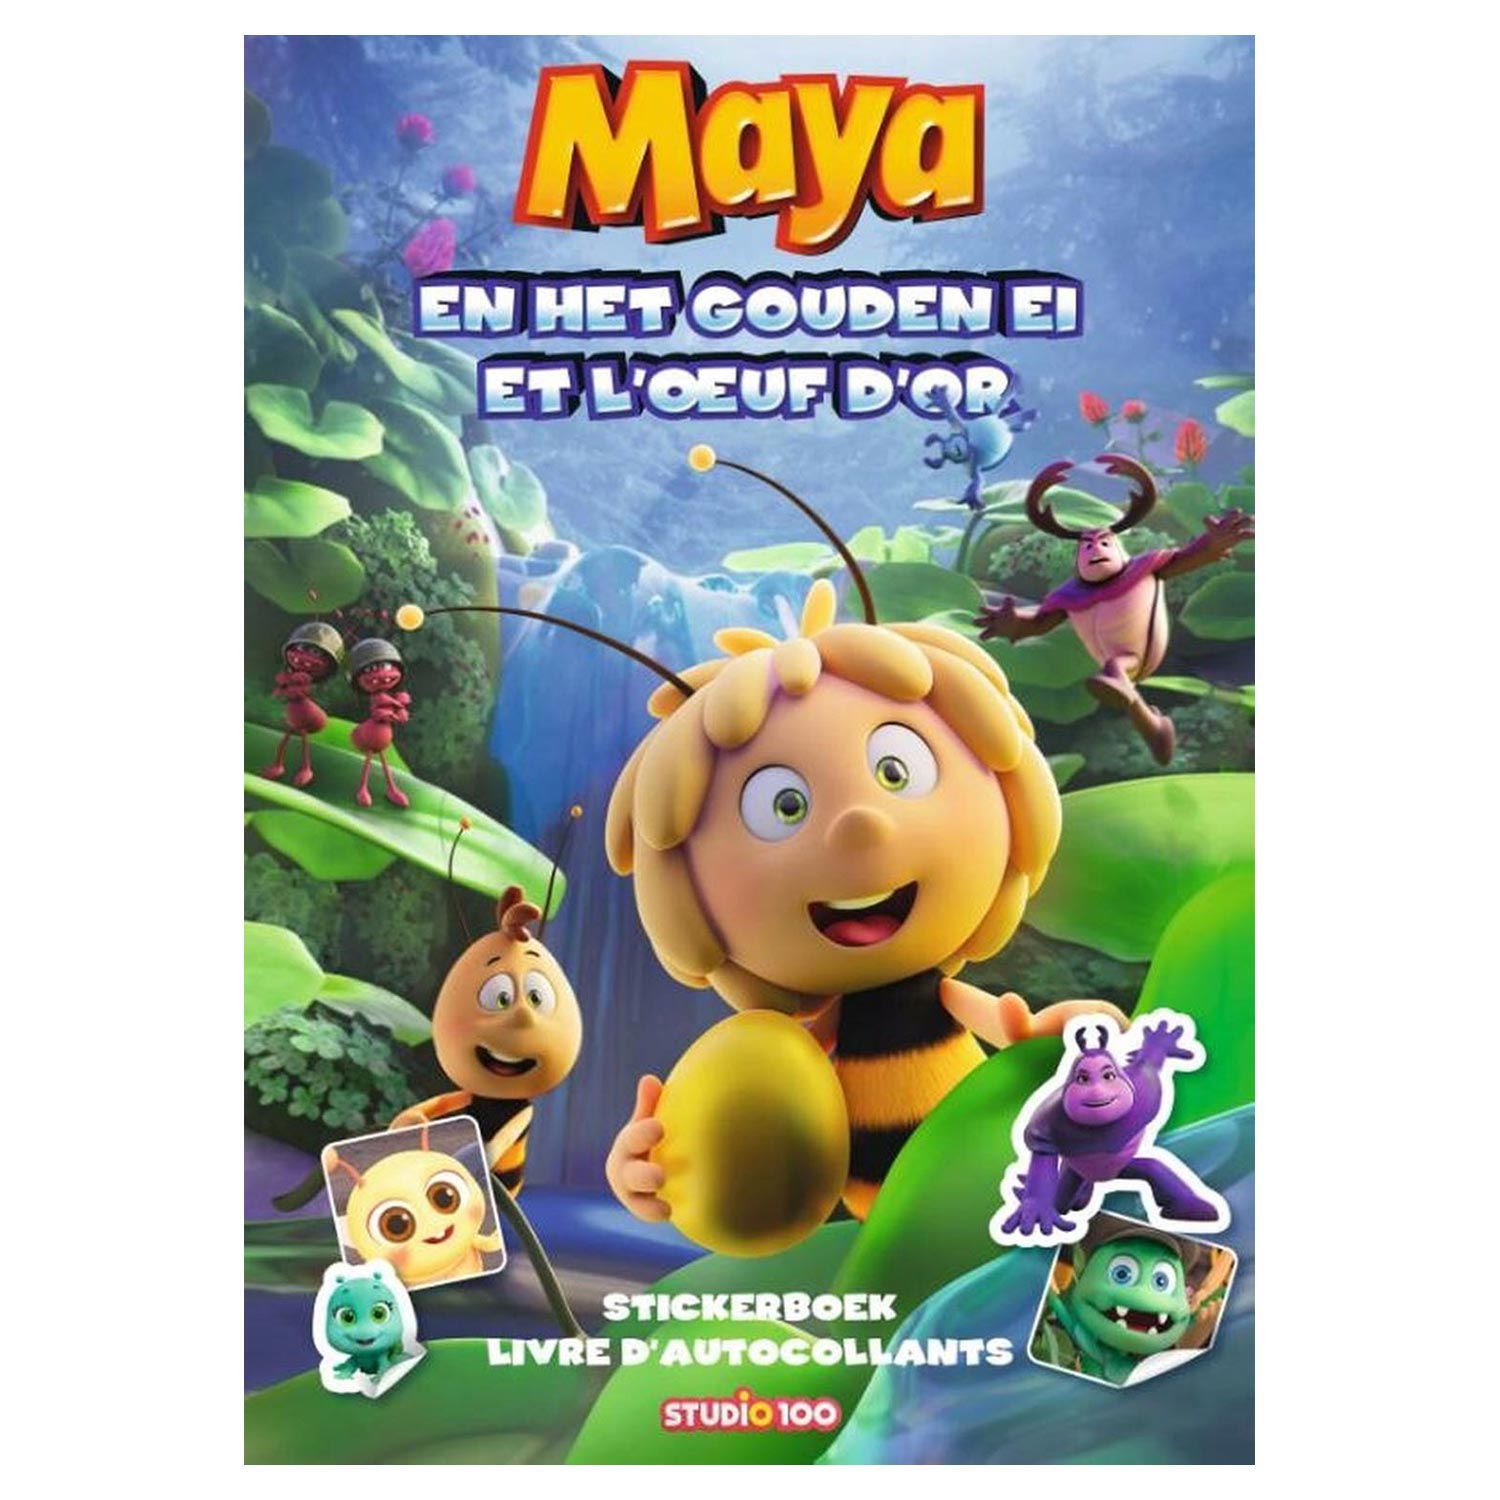 Maya the Bee Sticker Book - The Golden Egg | Thimble Toys